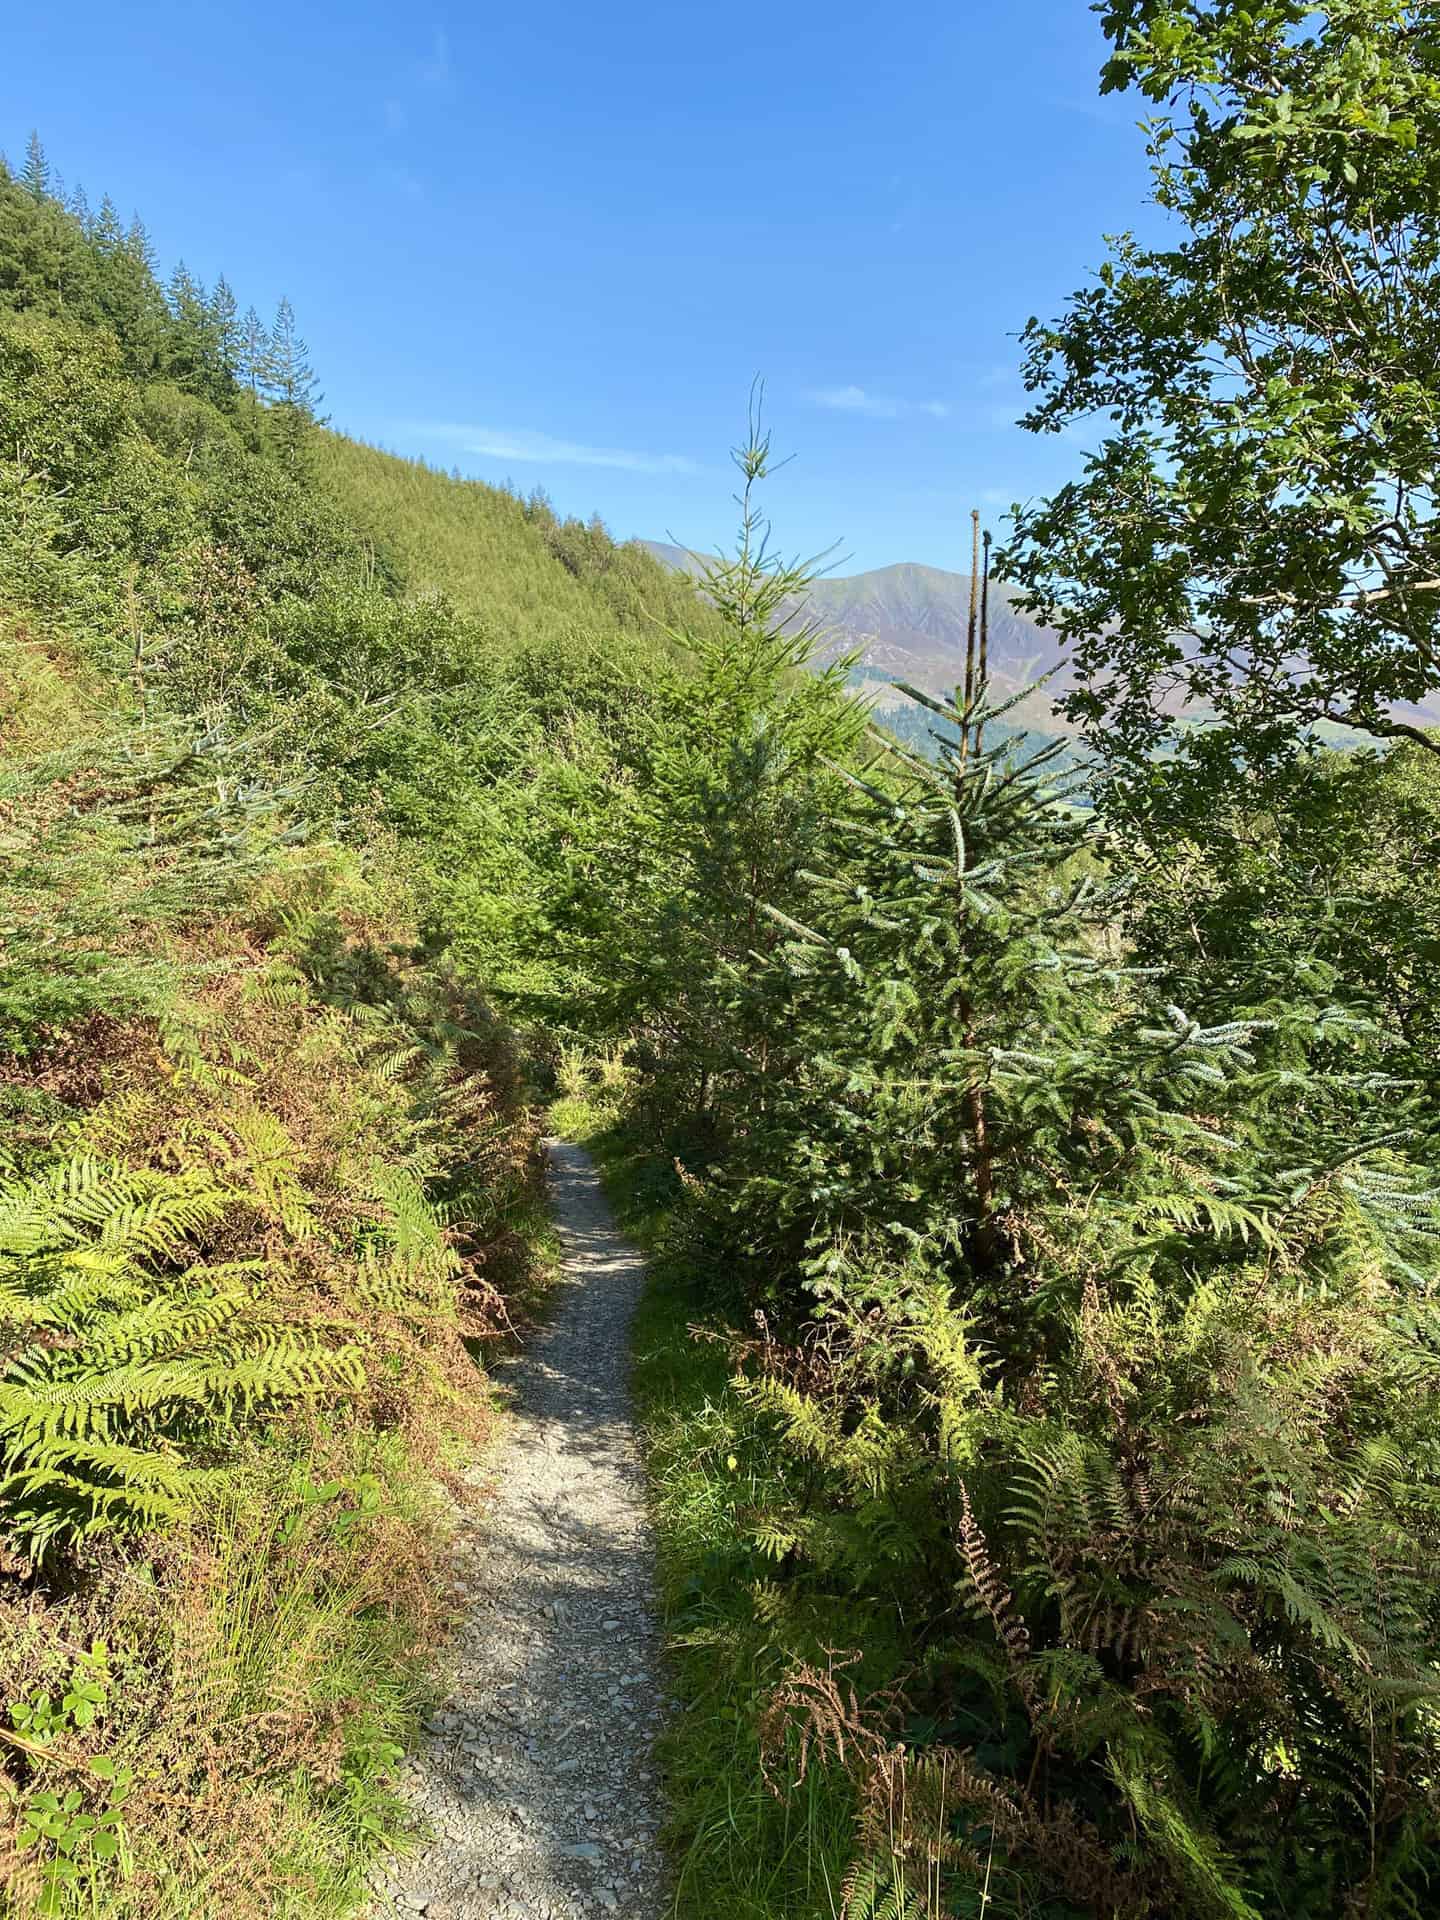 The forest path leading to Thornthwaite.